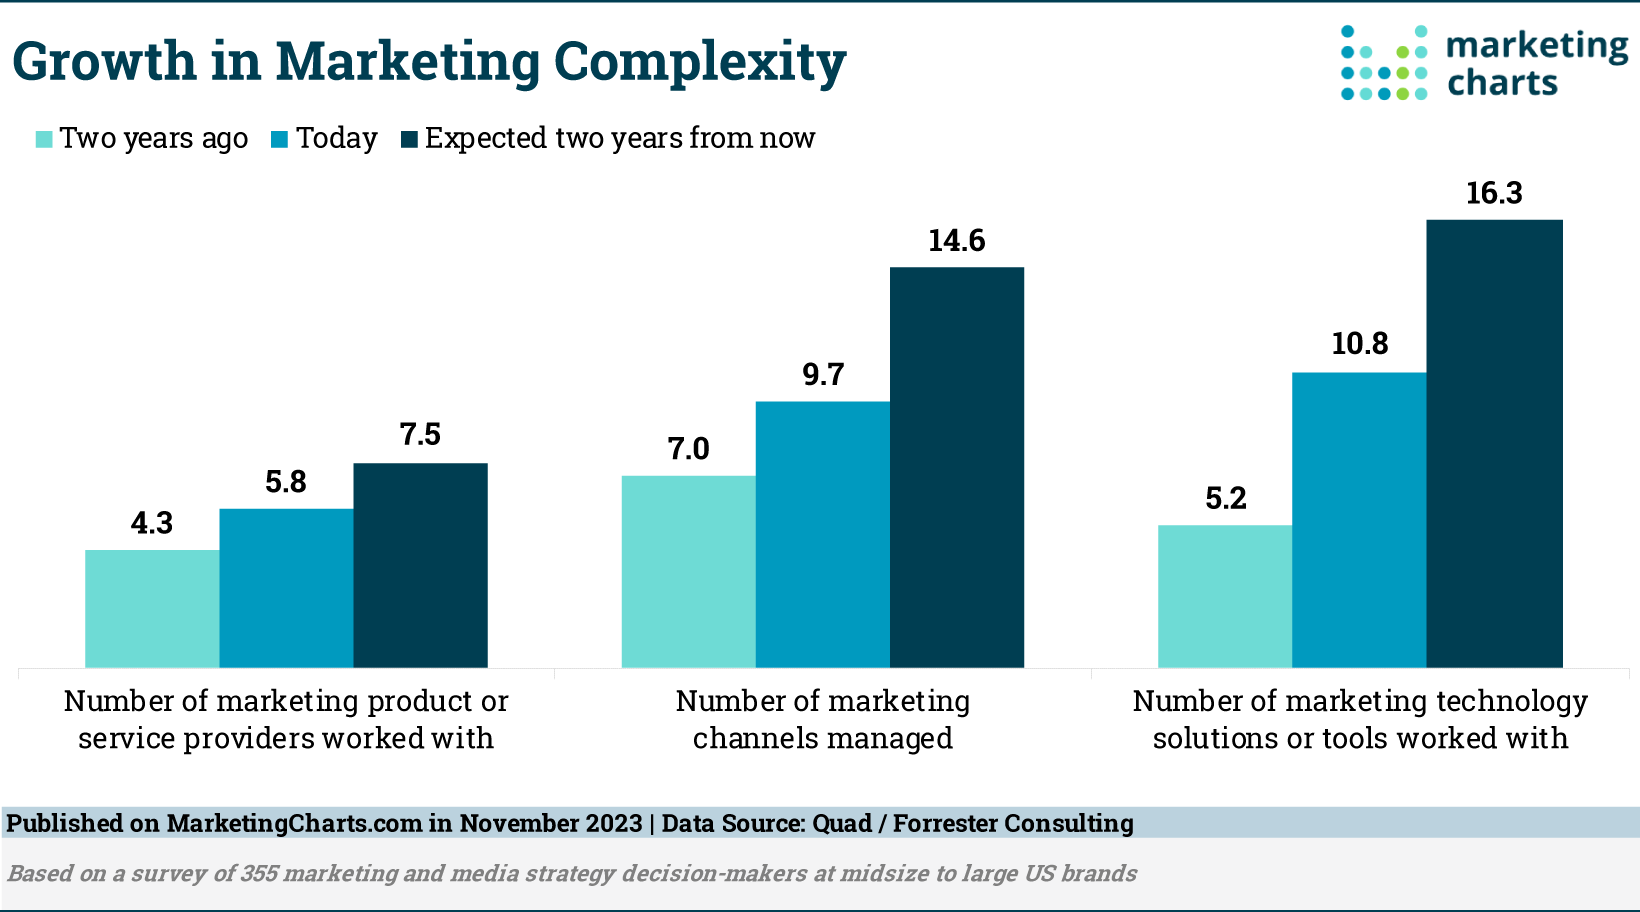 Is Marketing Becoming More Complex?